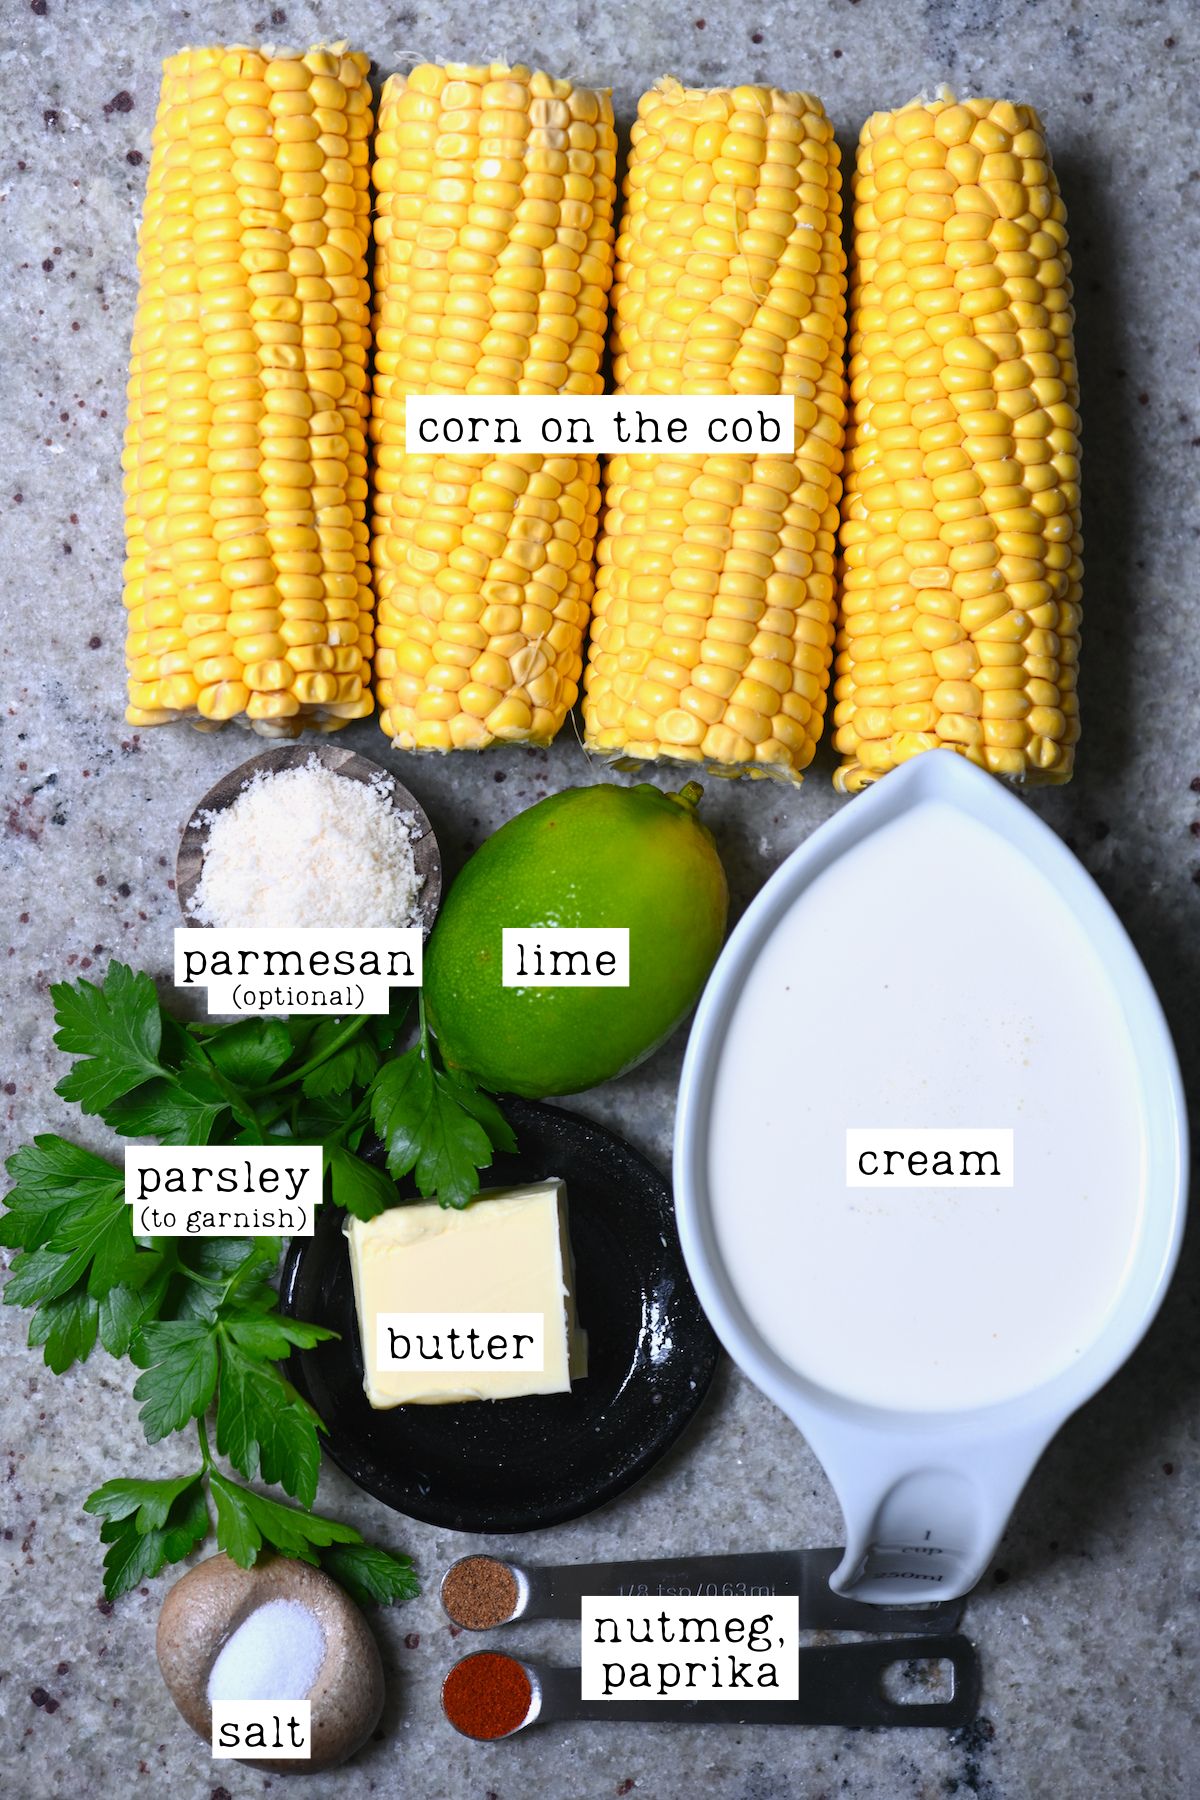 Ingredients for creamed corn